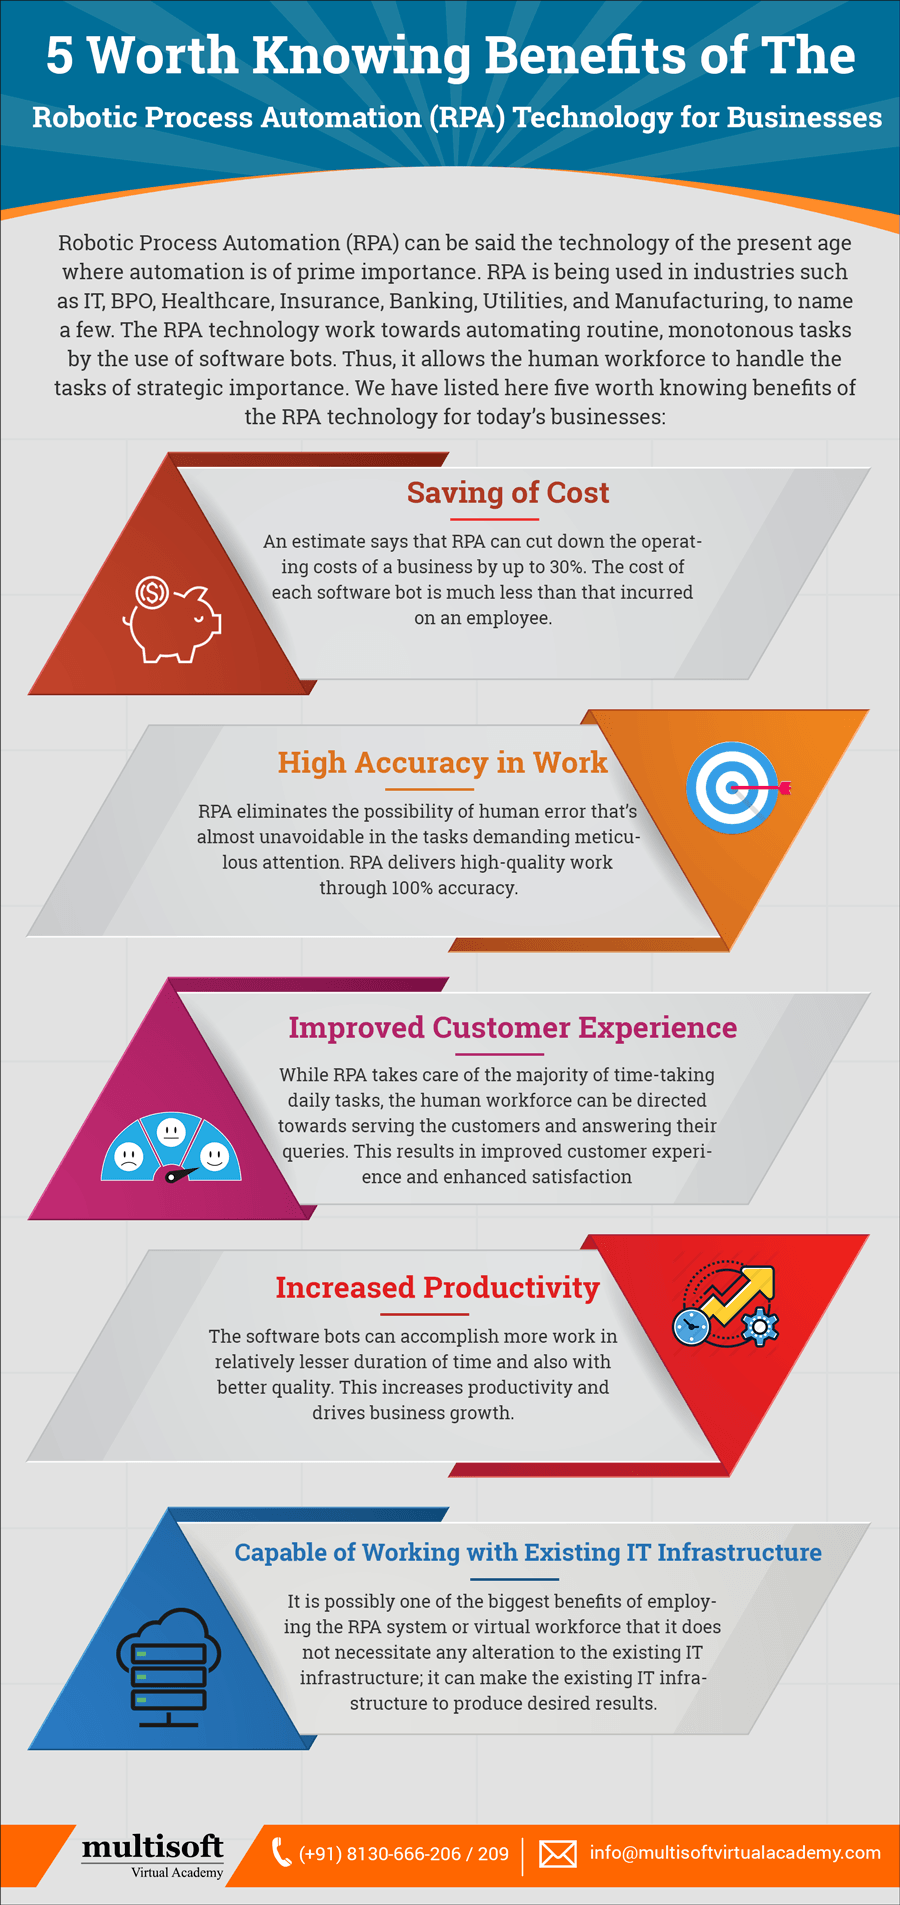 5 Worth Knowing Benefits Of The Robotic Process Automation (RPA) Technology For Businesses Infographic